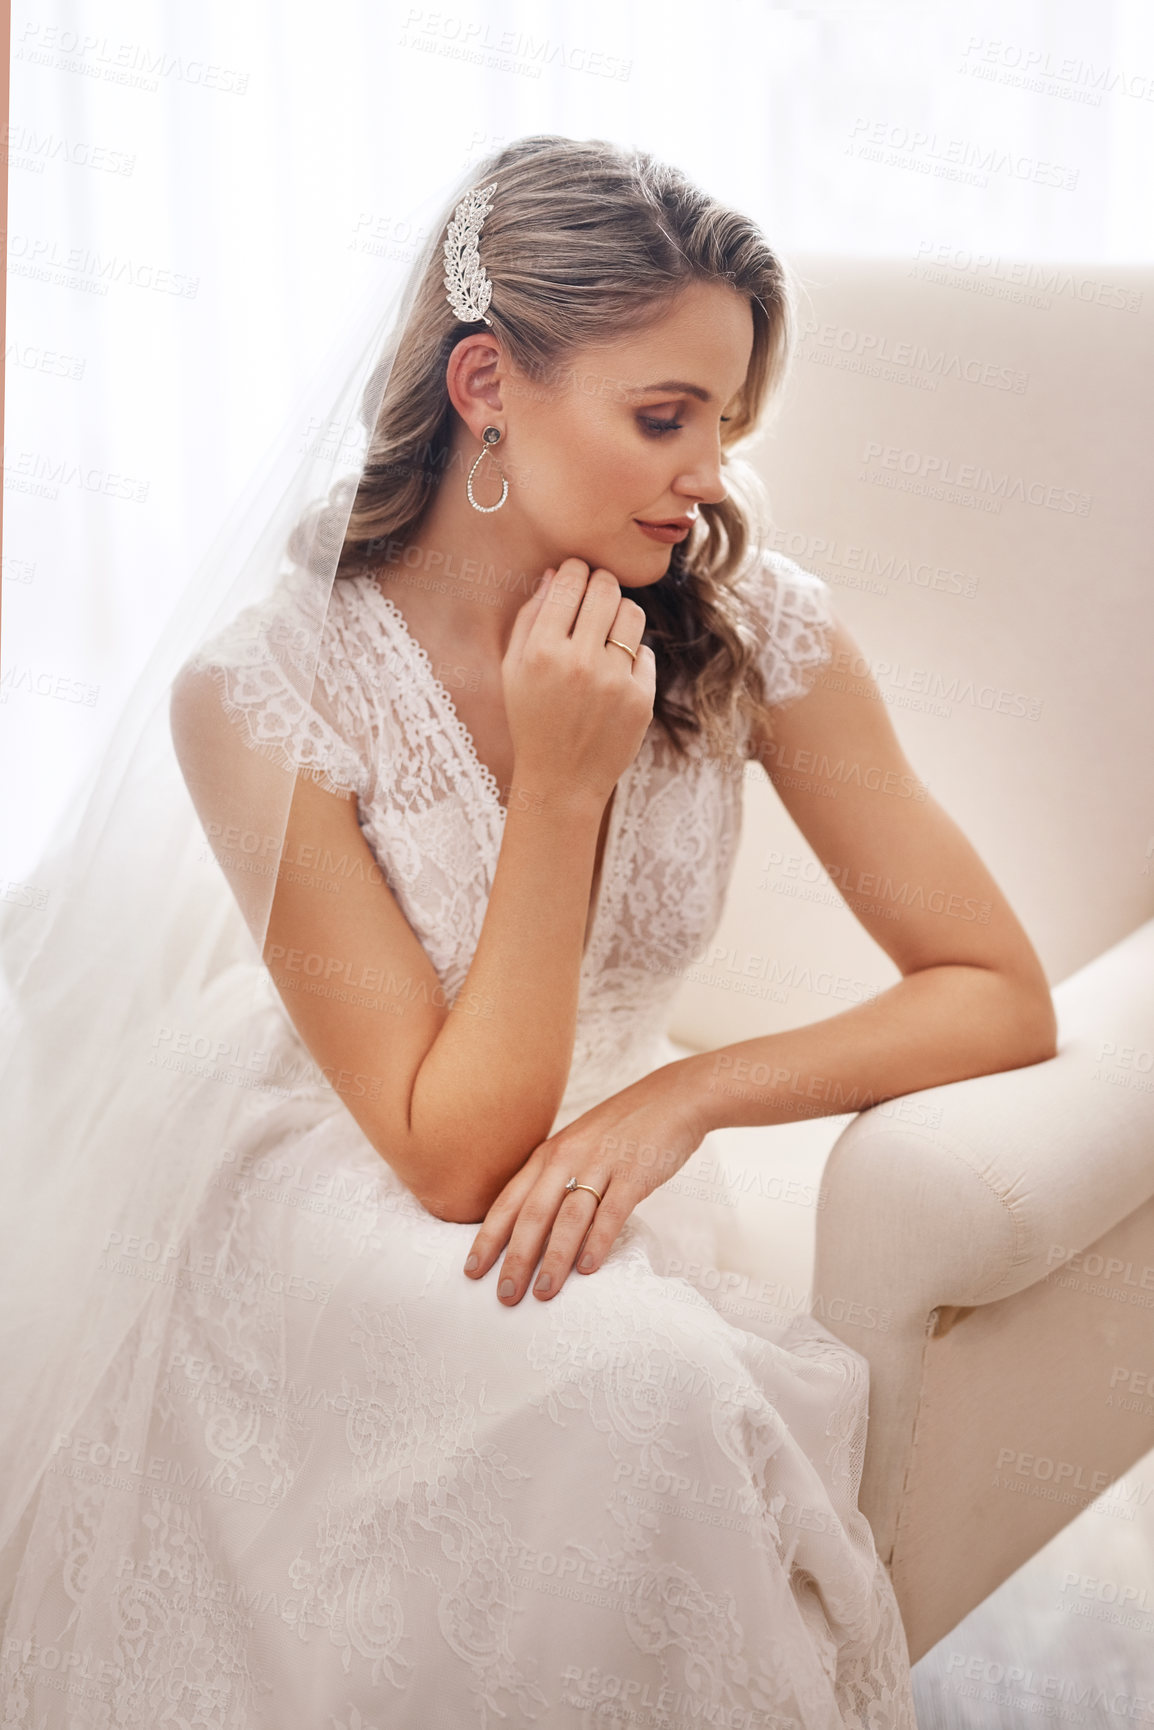 Buy stock photo Cropped shot of an attractive young bride sitting alone in the dressing room and looking contemplative before her wedding